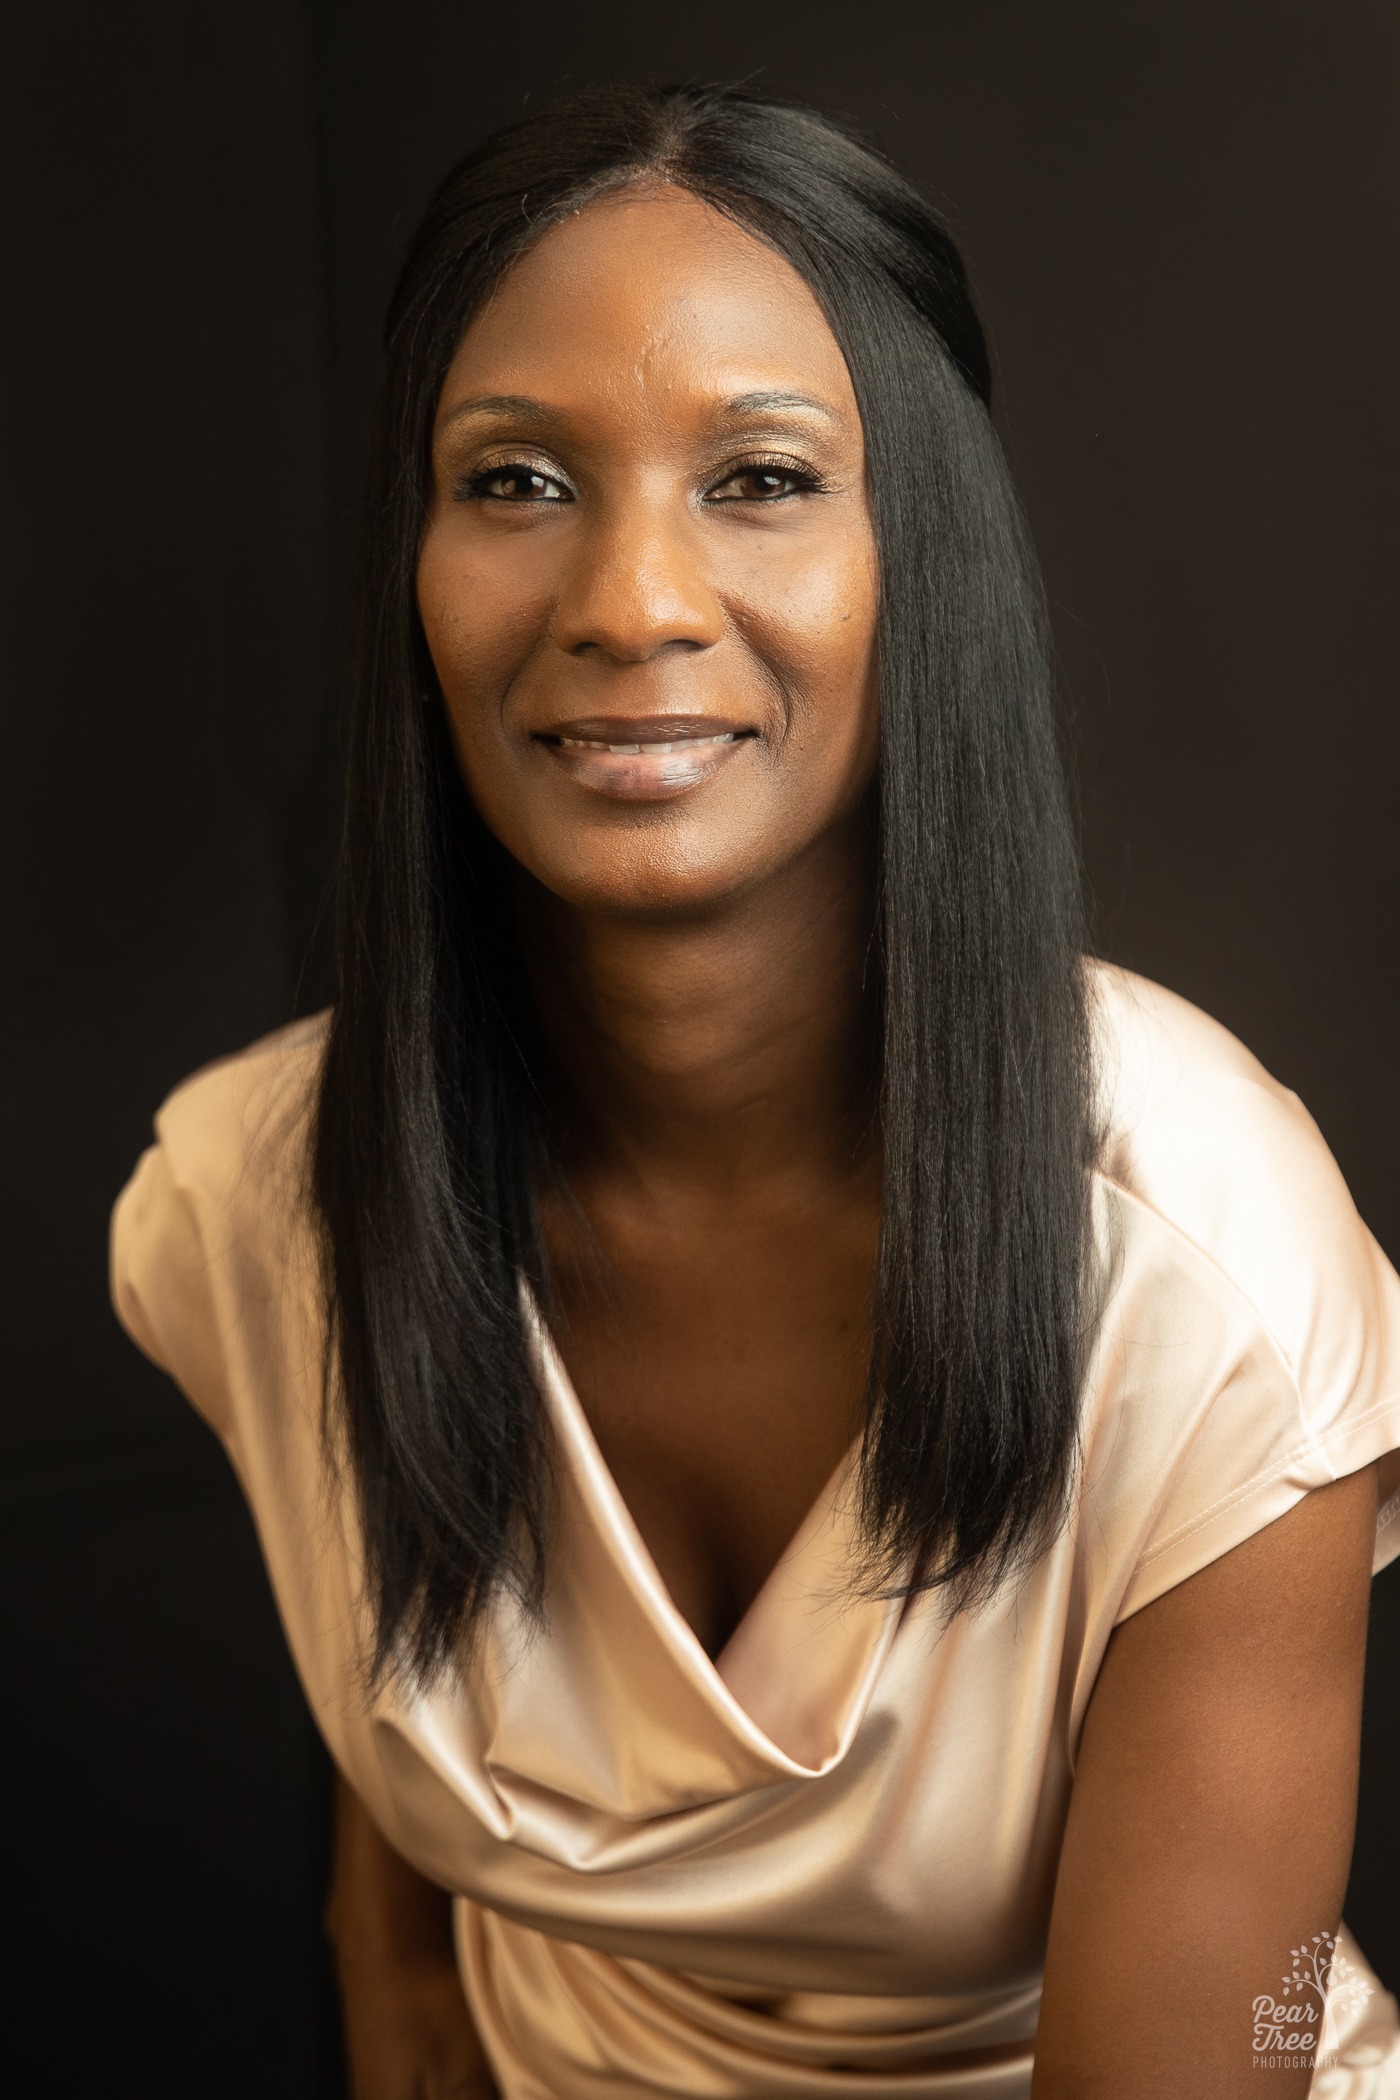 Professional headshot in Canton of an African American woman smiling while wearing a pearl shirt and leaning towards the camera